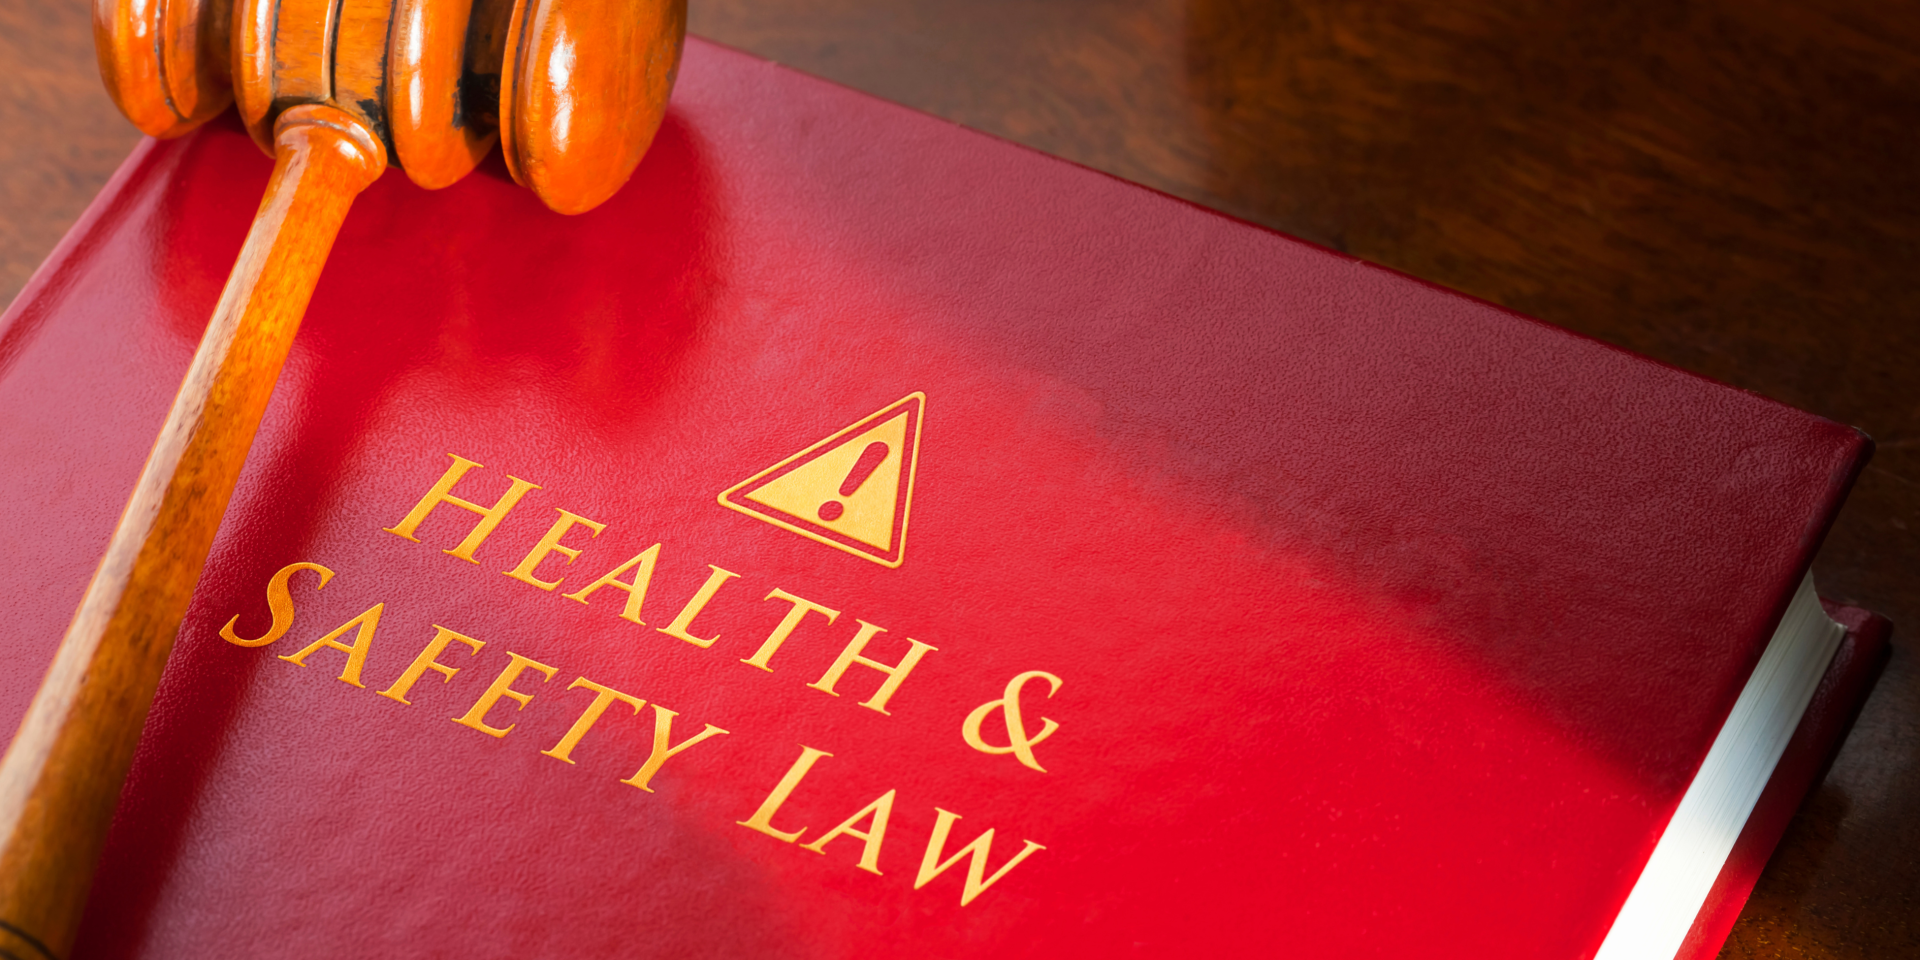 Health & Safety Law Book